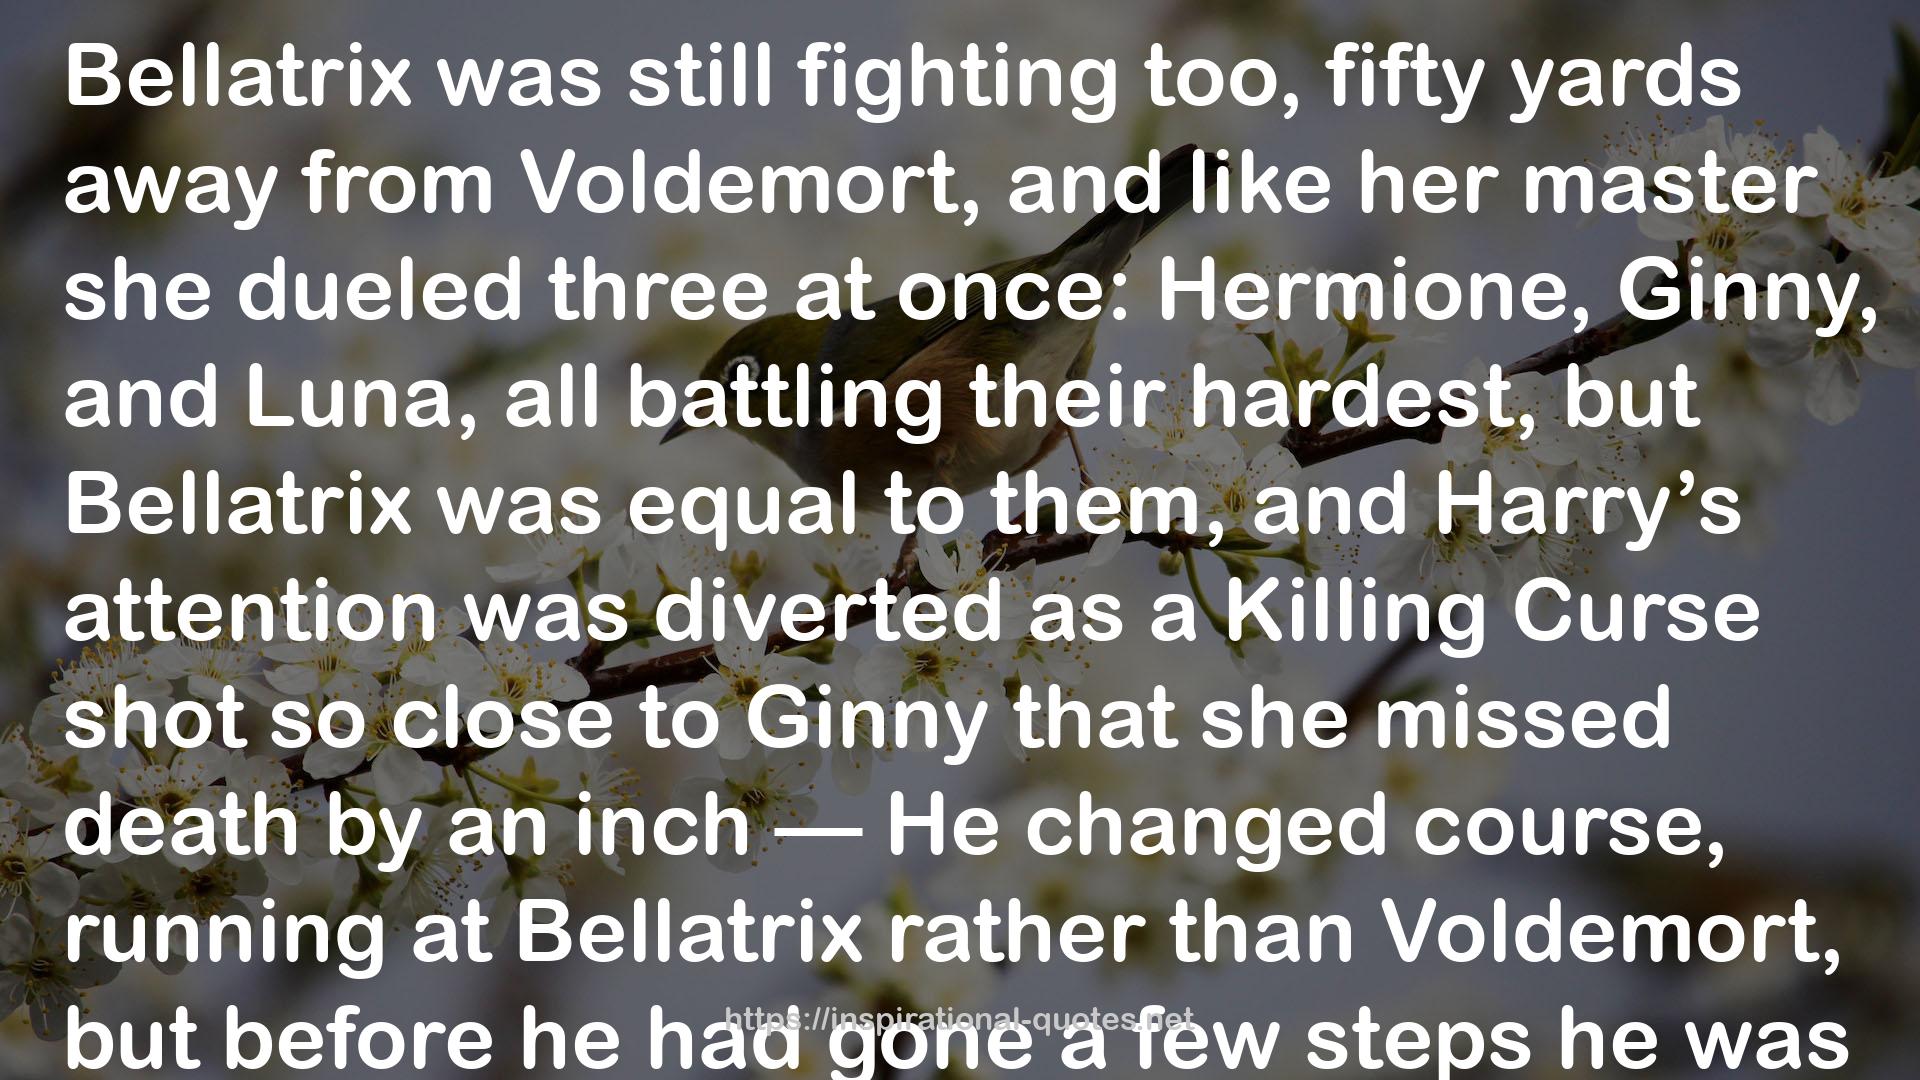 Harry Potter and the Deathly Hallows (Harry Potter, #7) QUOTES